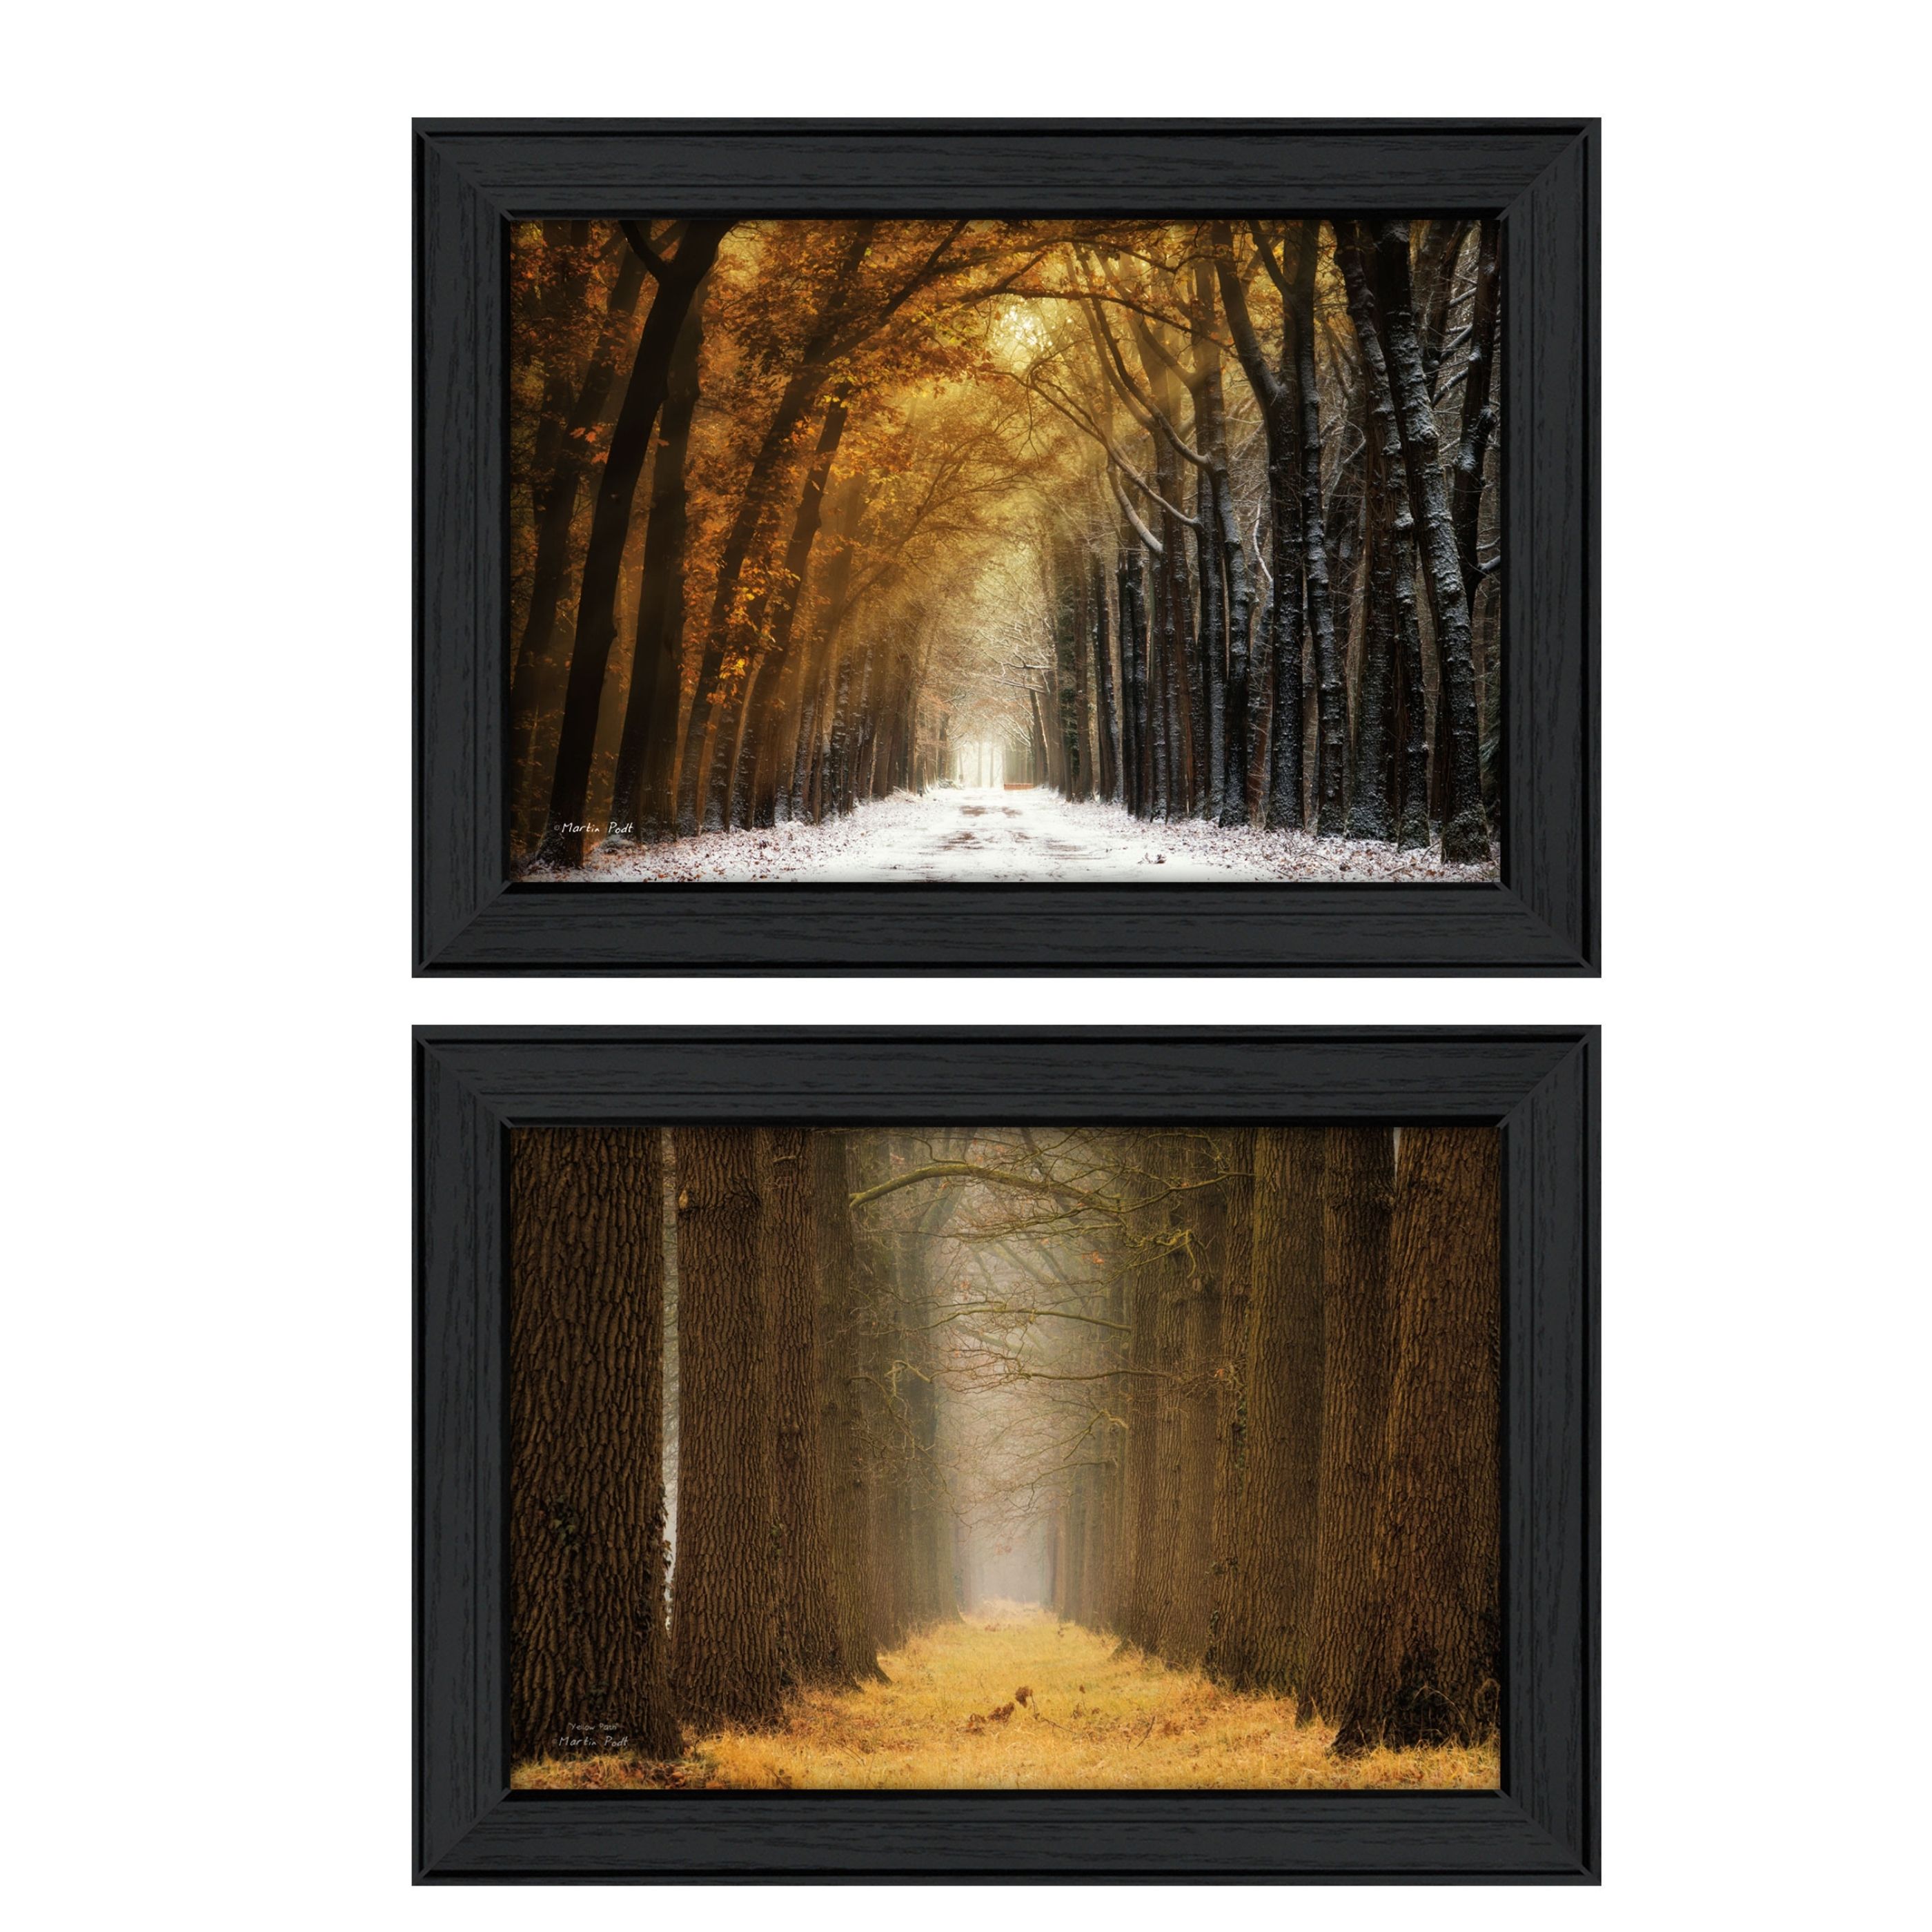 "Golden Forest Path Collection" 2-Piece Vignette By Martin Podt, Printed Wall Art, Ready To Hang Framed Poster, Black Frame